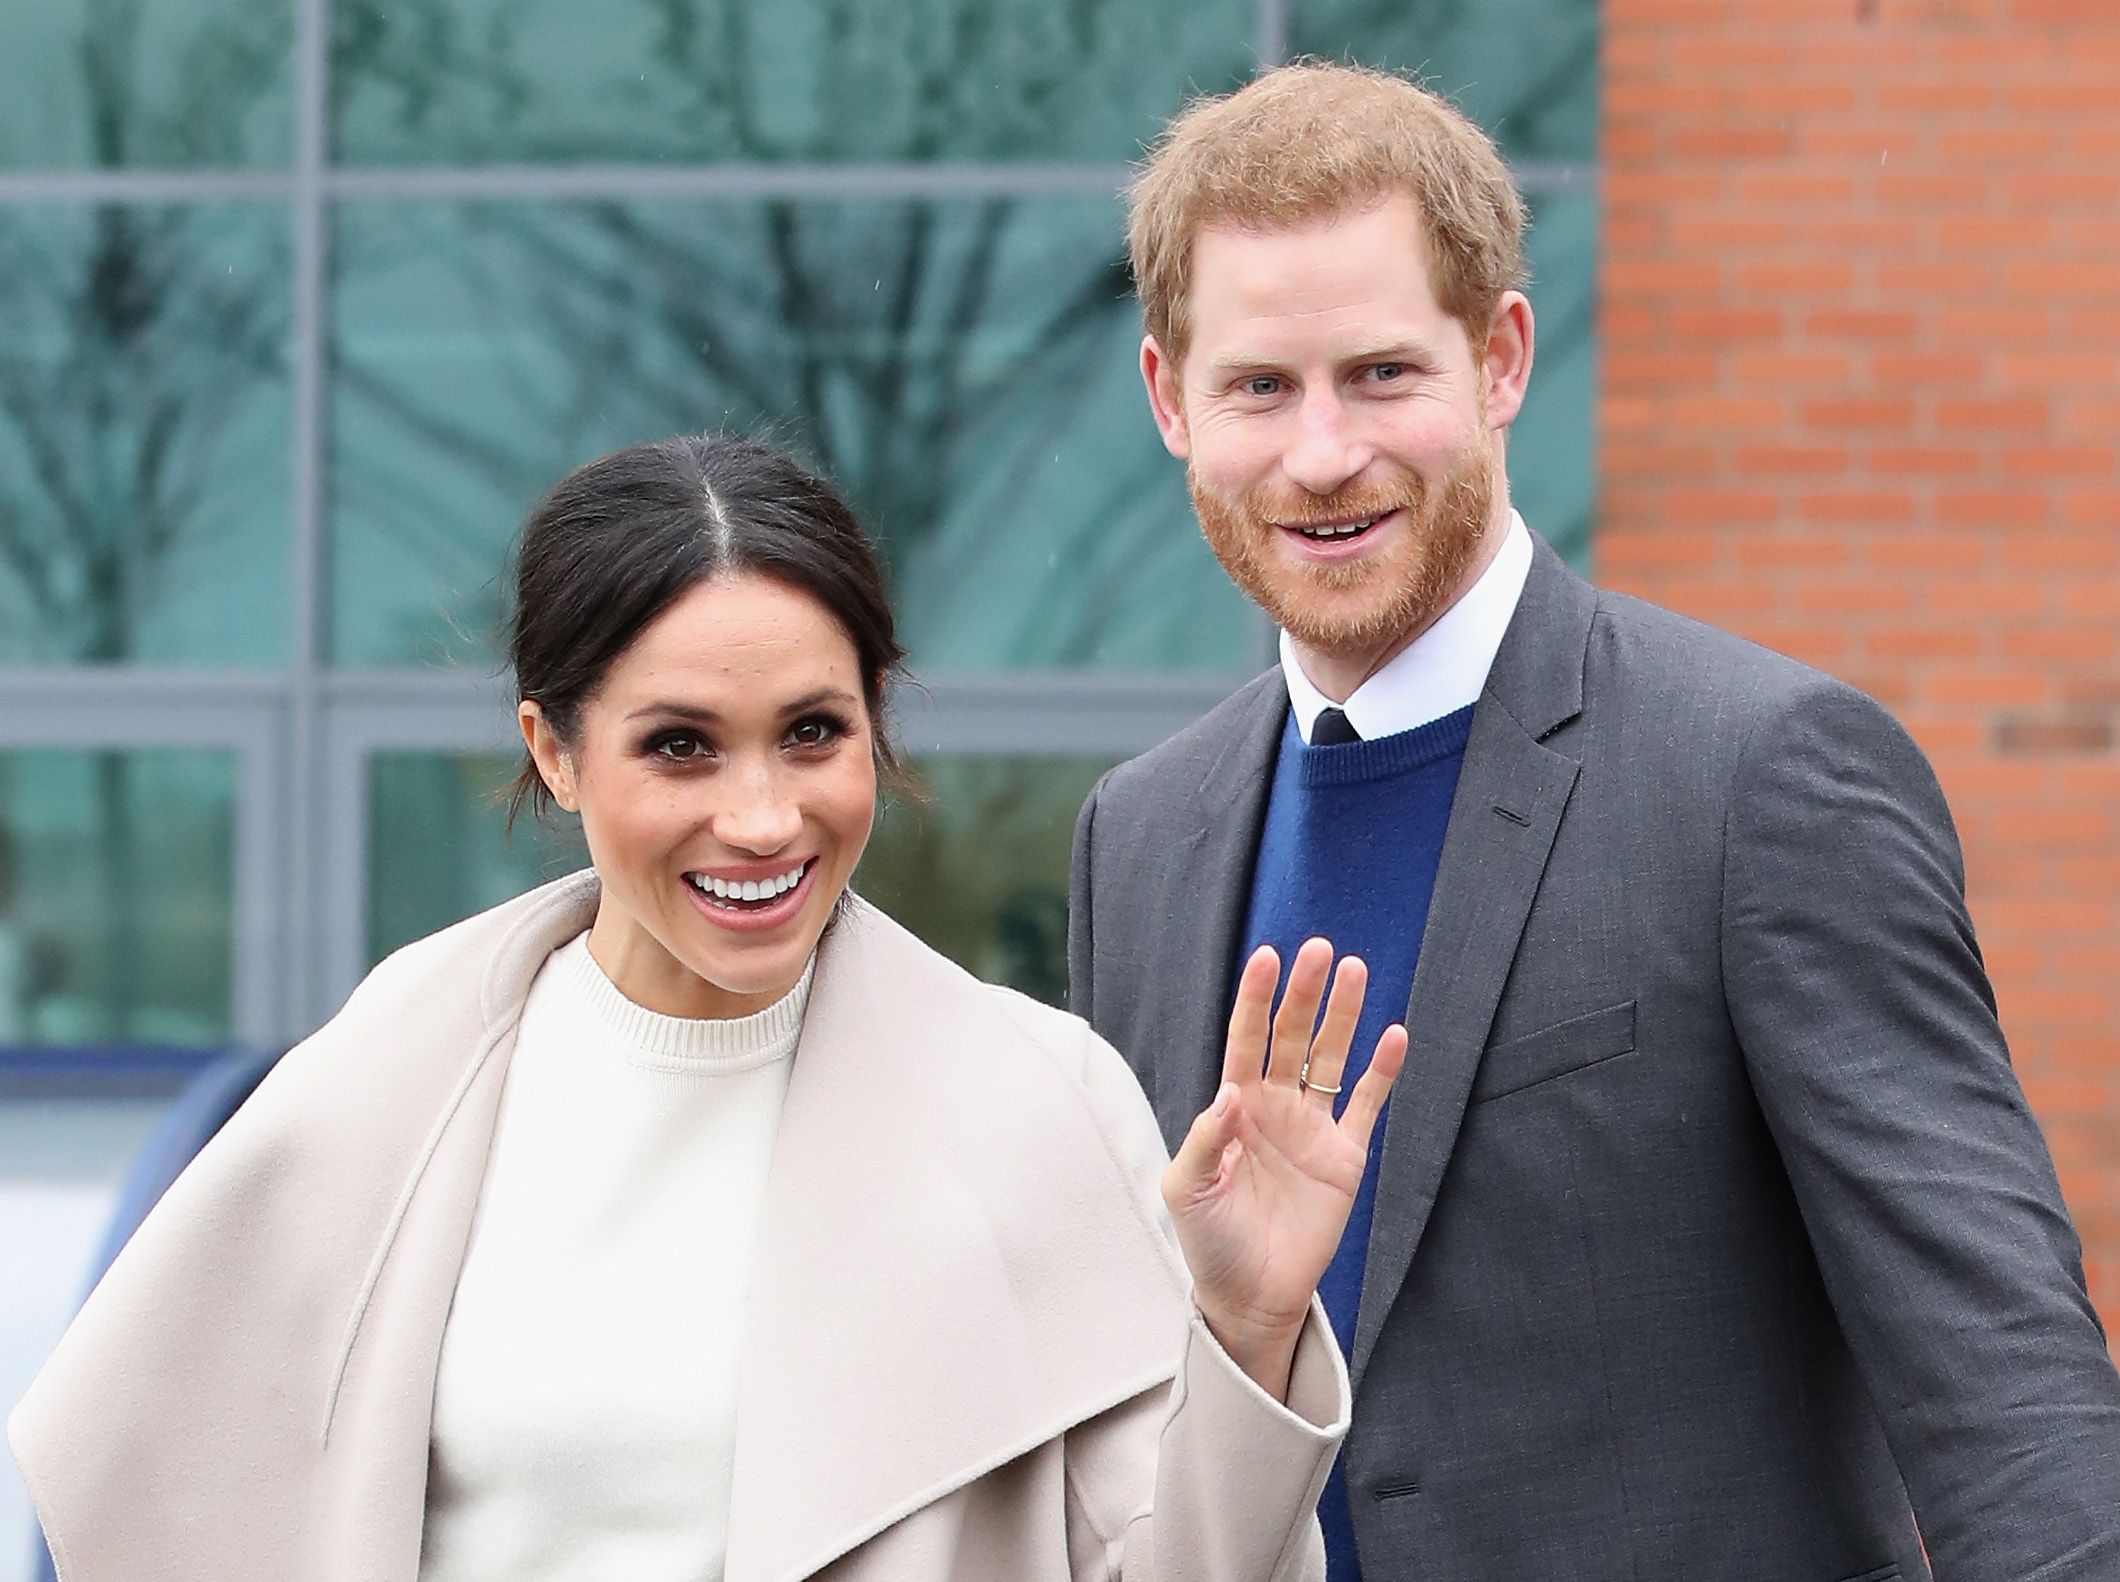 Prince Harry and Meghan Markle depart from Catalyst Inc, Northern Ireland's next generation science park on March 23, 2018 | Photo: Getty Images